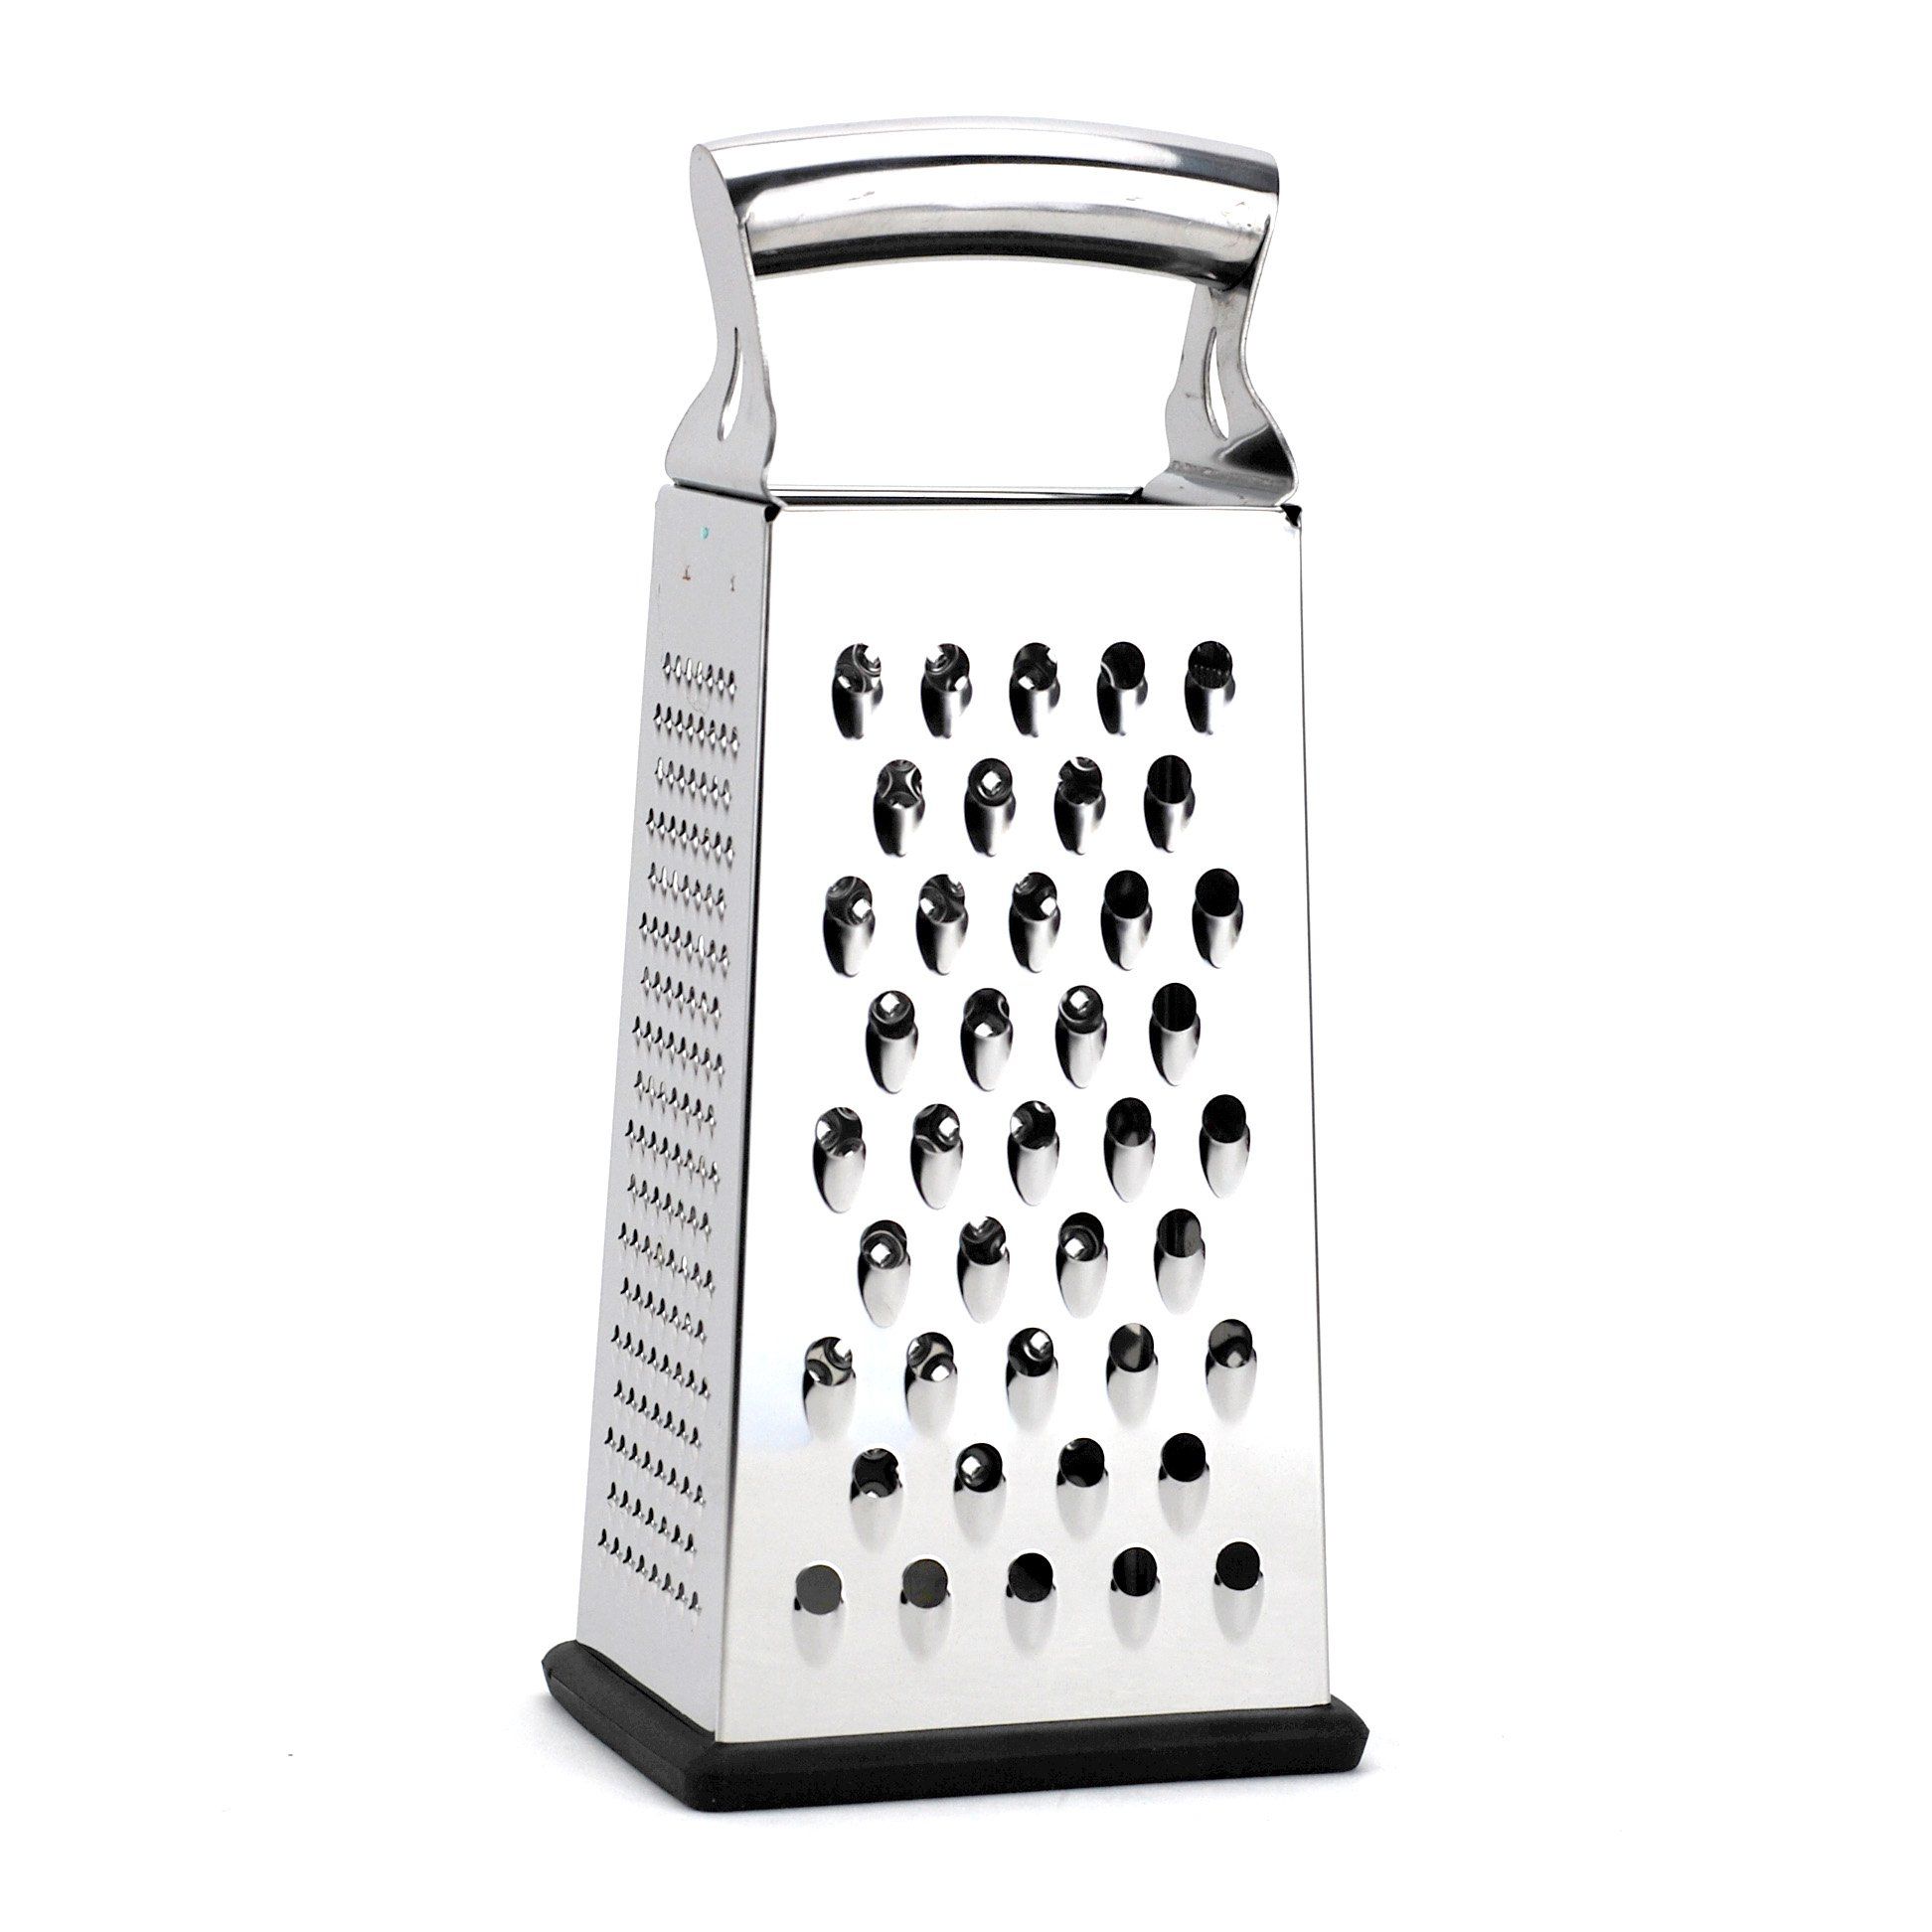 Cheese Grater Container, Mouli Parmesan Potato Grater Shredder ...